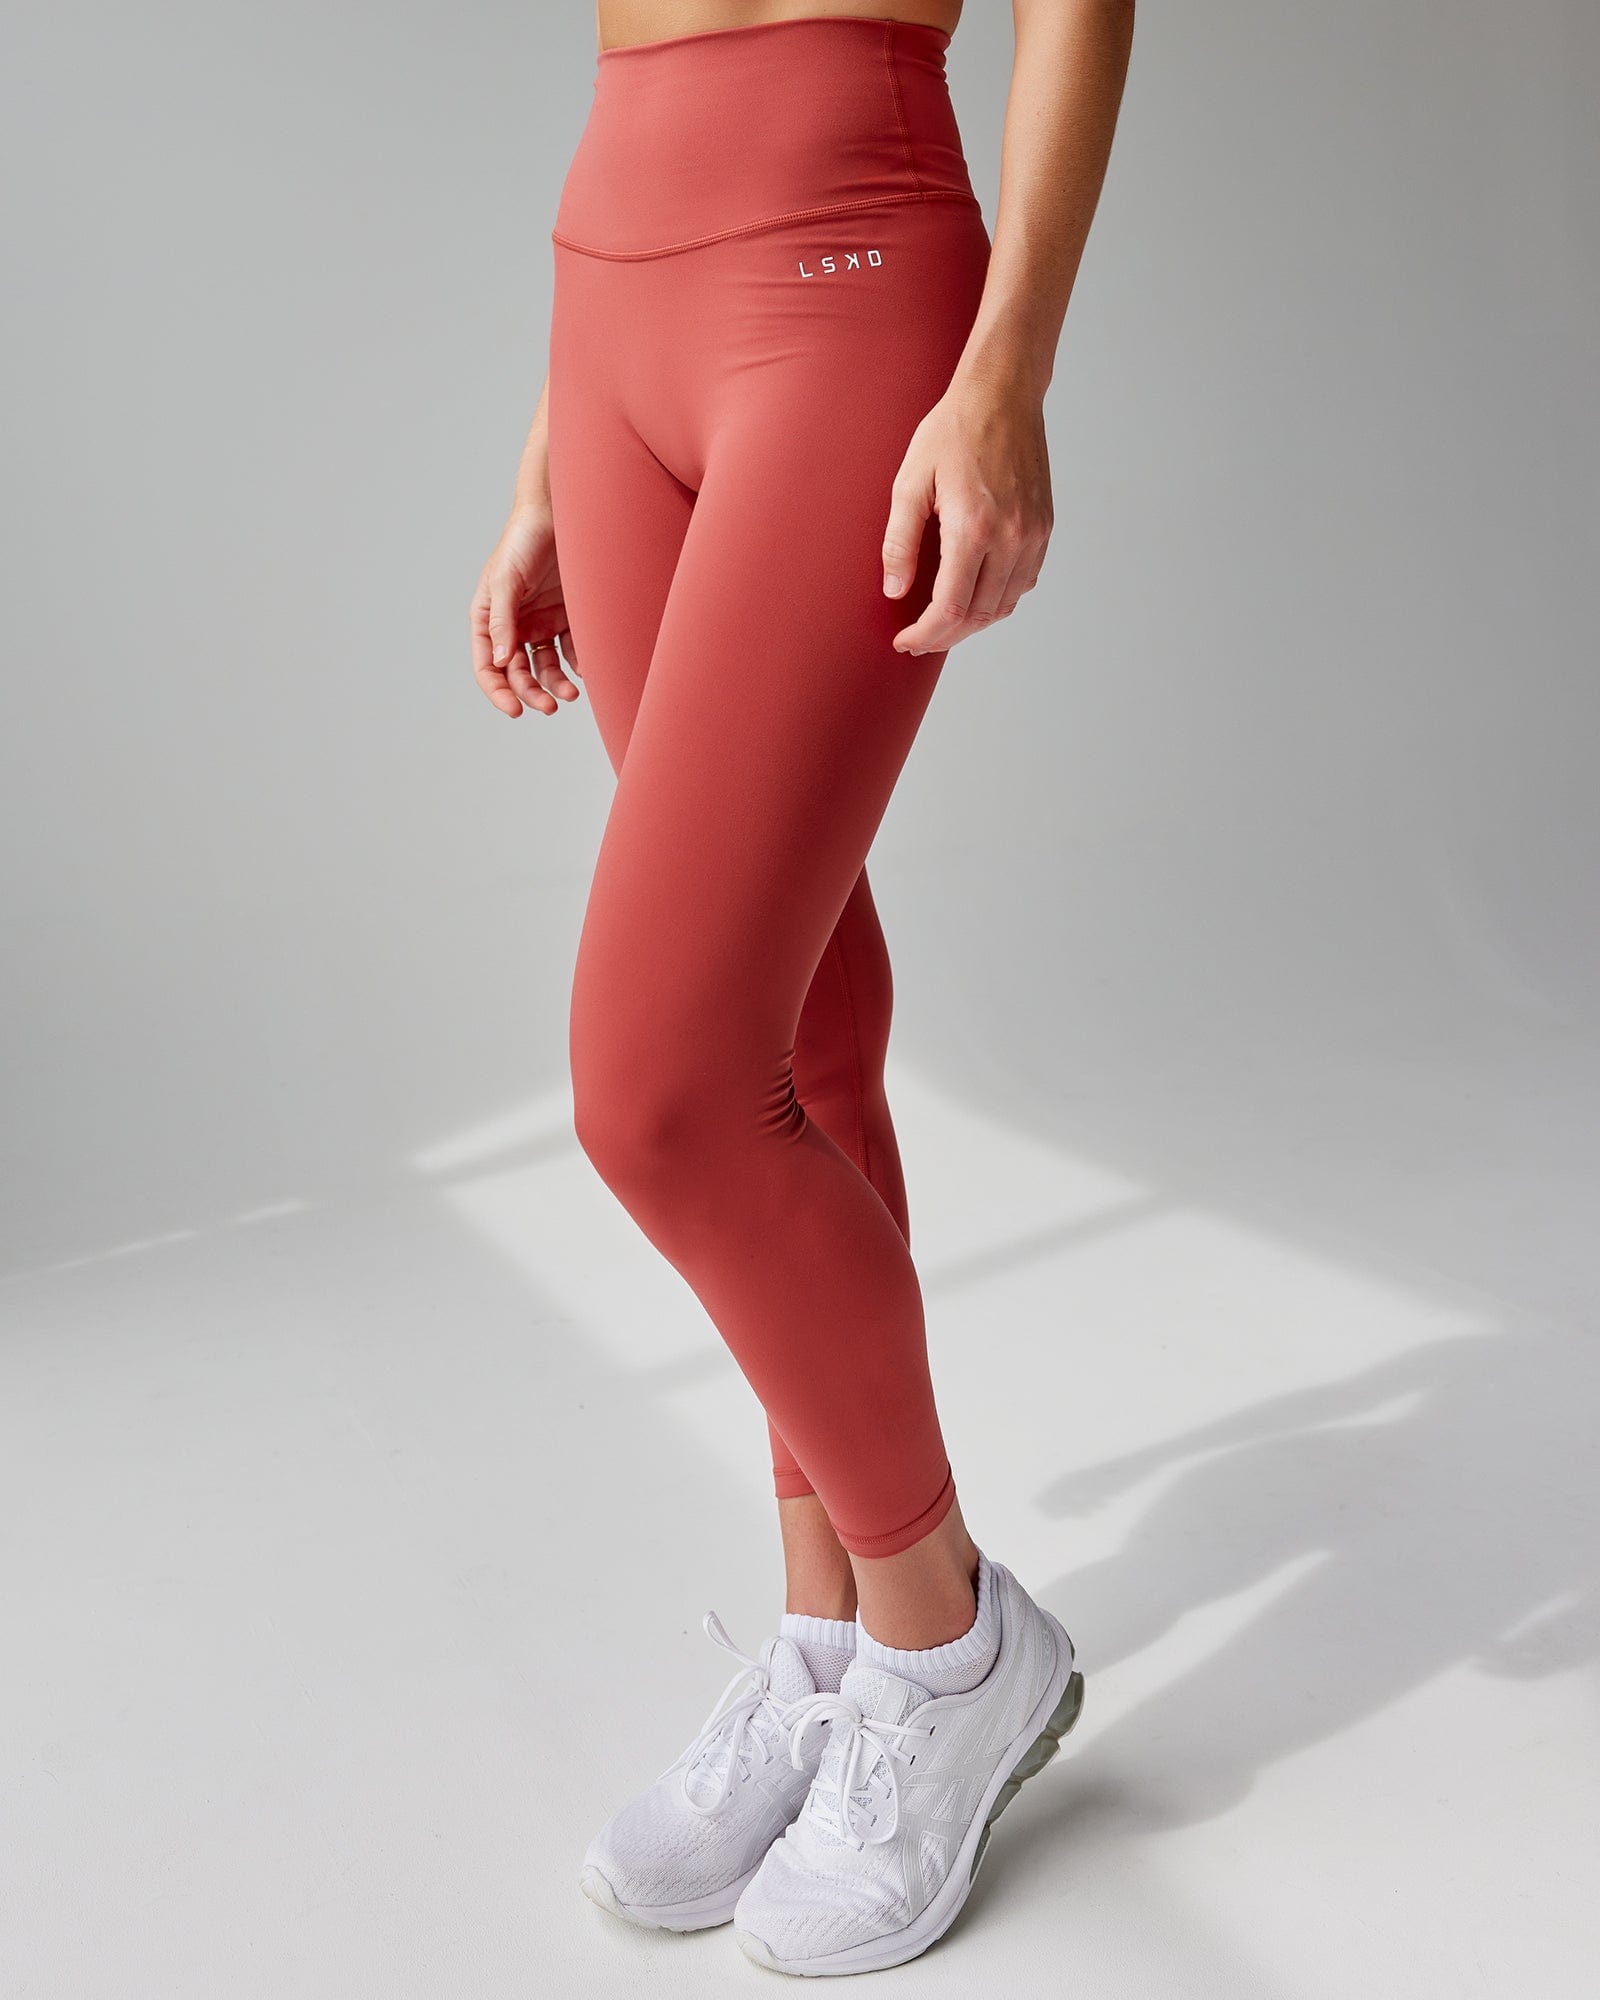 29 Best Workout Clothes for Women, According to Fitness Experts | SELF